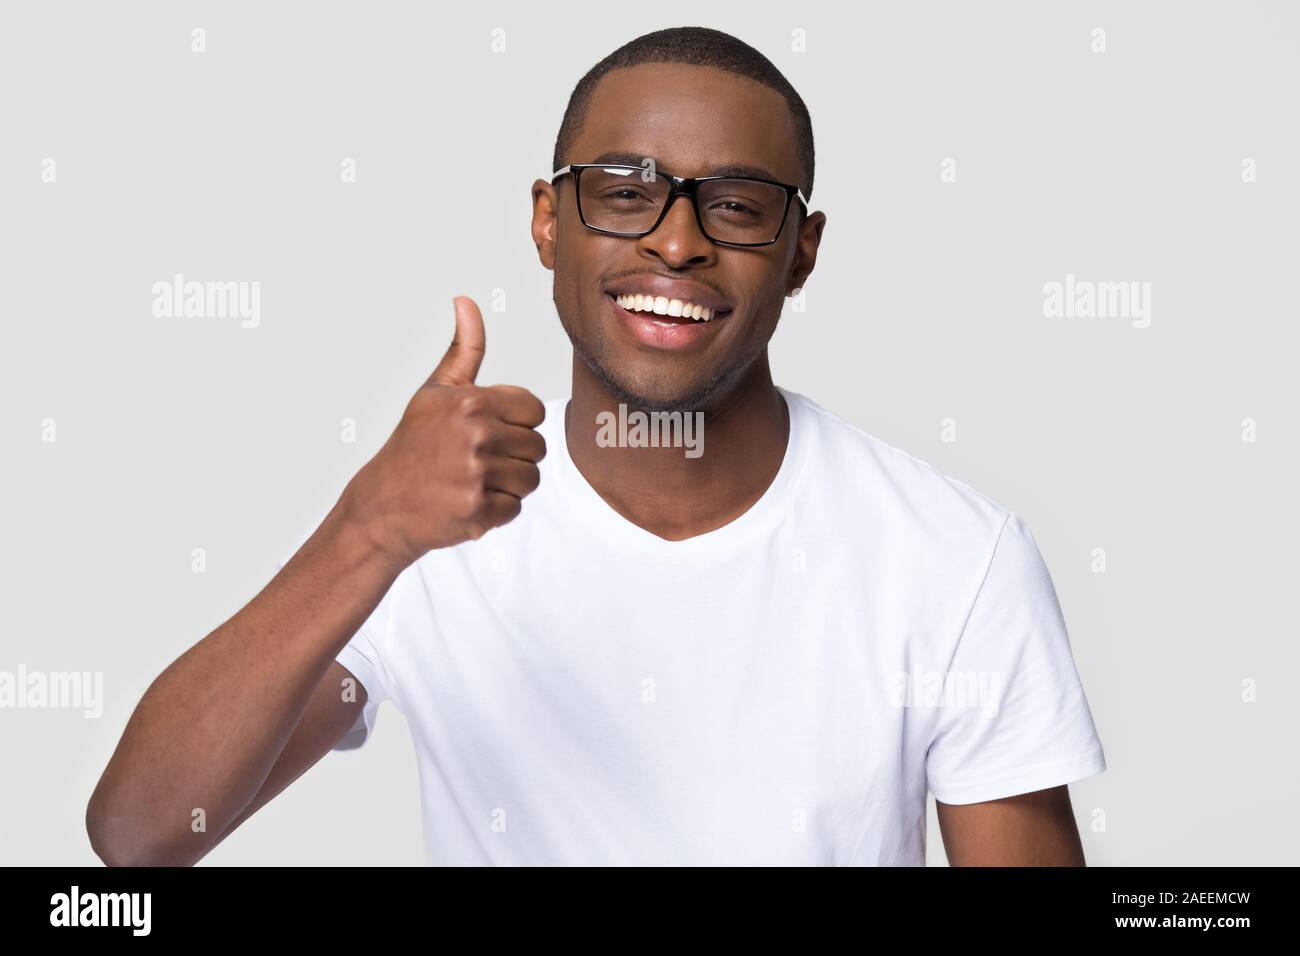 African American man with healthy white smile showing thumbs up Stock Photo